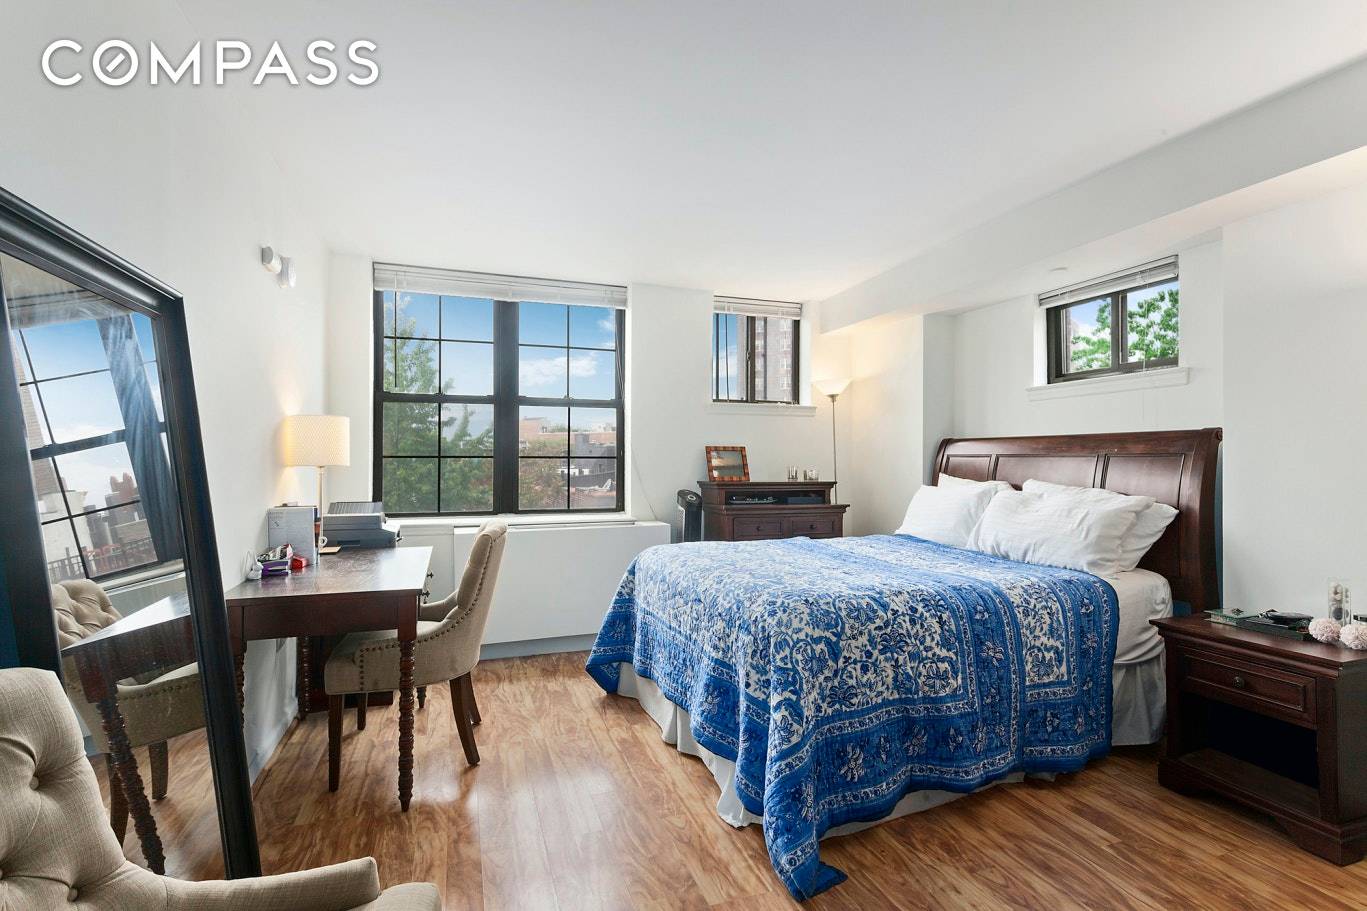 NO FEE ! A south facing corner studio with beautiful downtown views in a full service building at the crossroads of the West Village, Chelsea, and Meatpacking District.